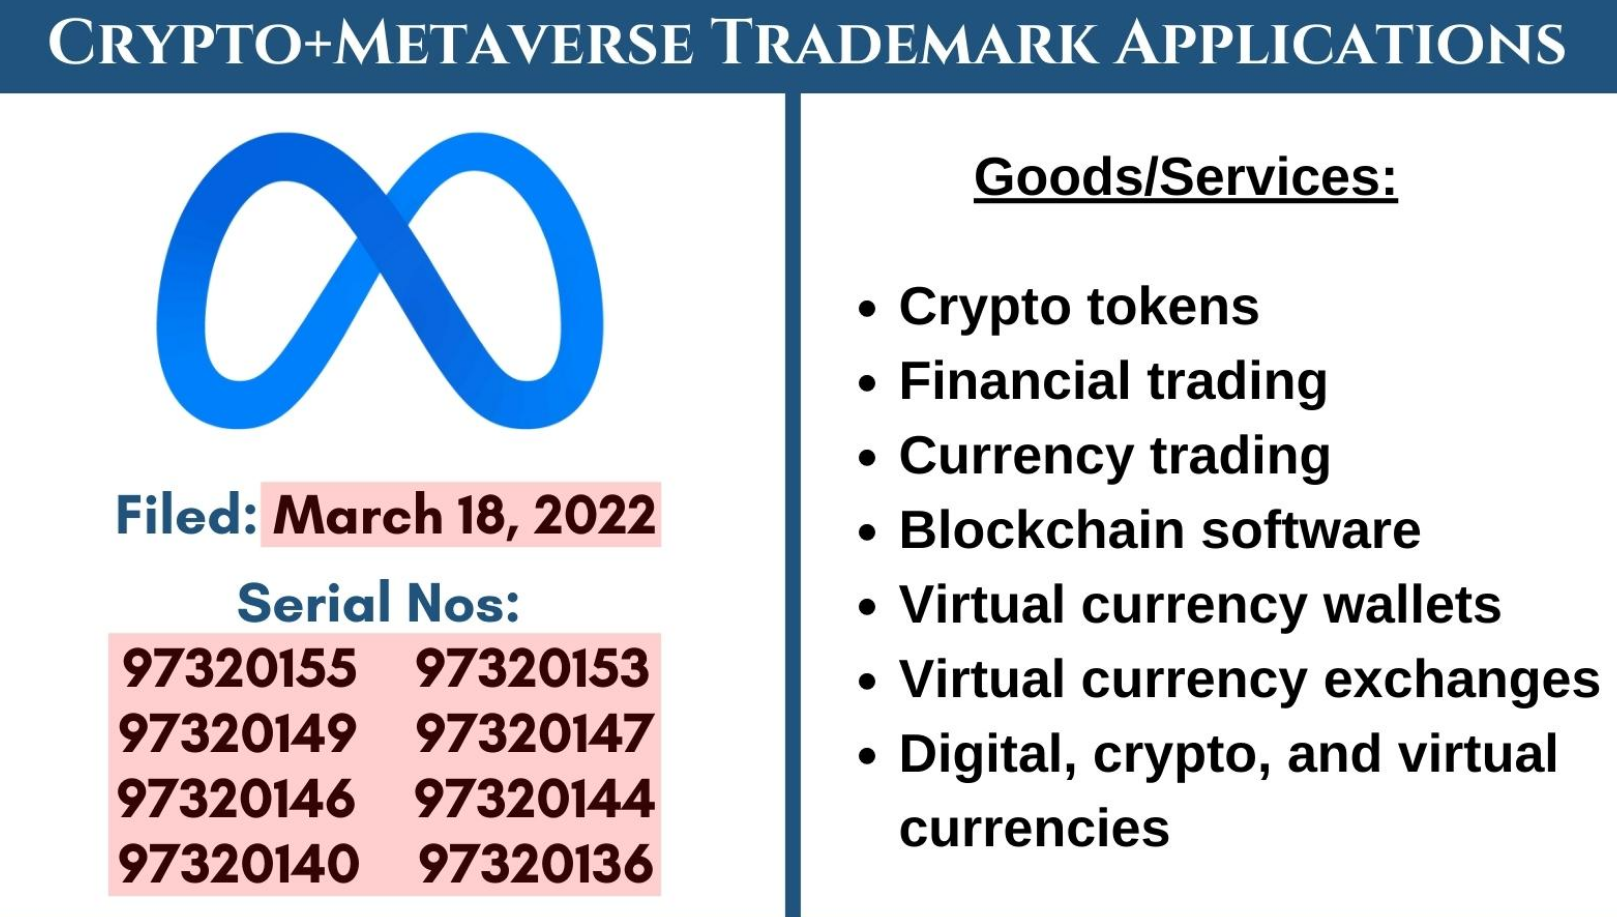 Mark Zuckerberg's Meta Go Metaverse with Crypto Trading in It According to 8 Trademark Applications